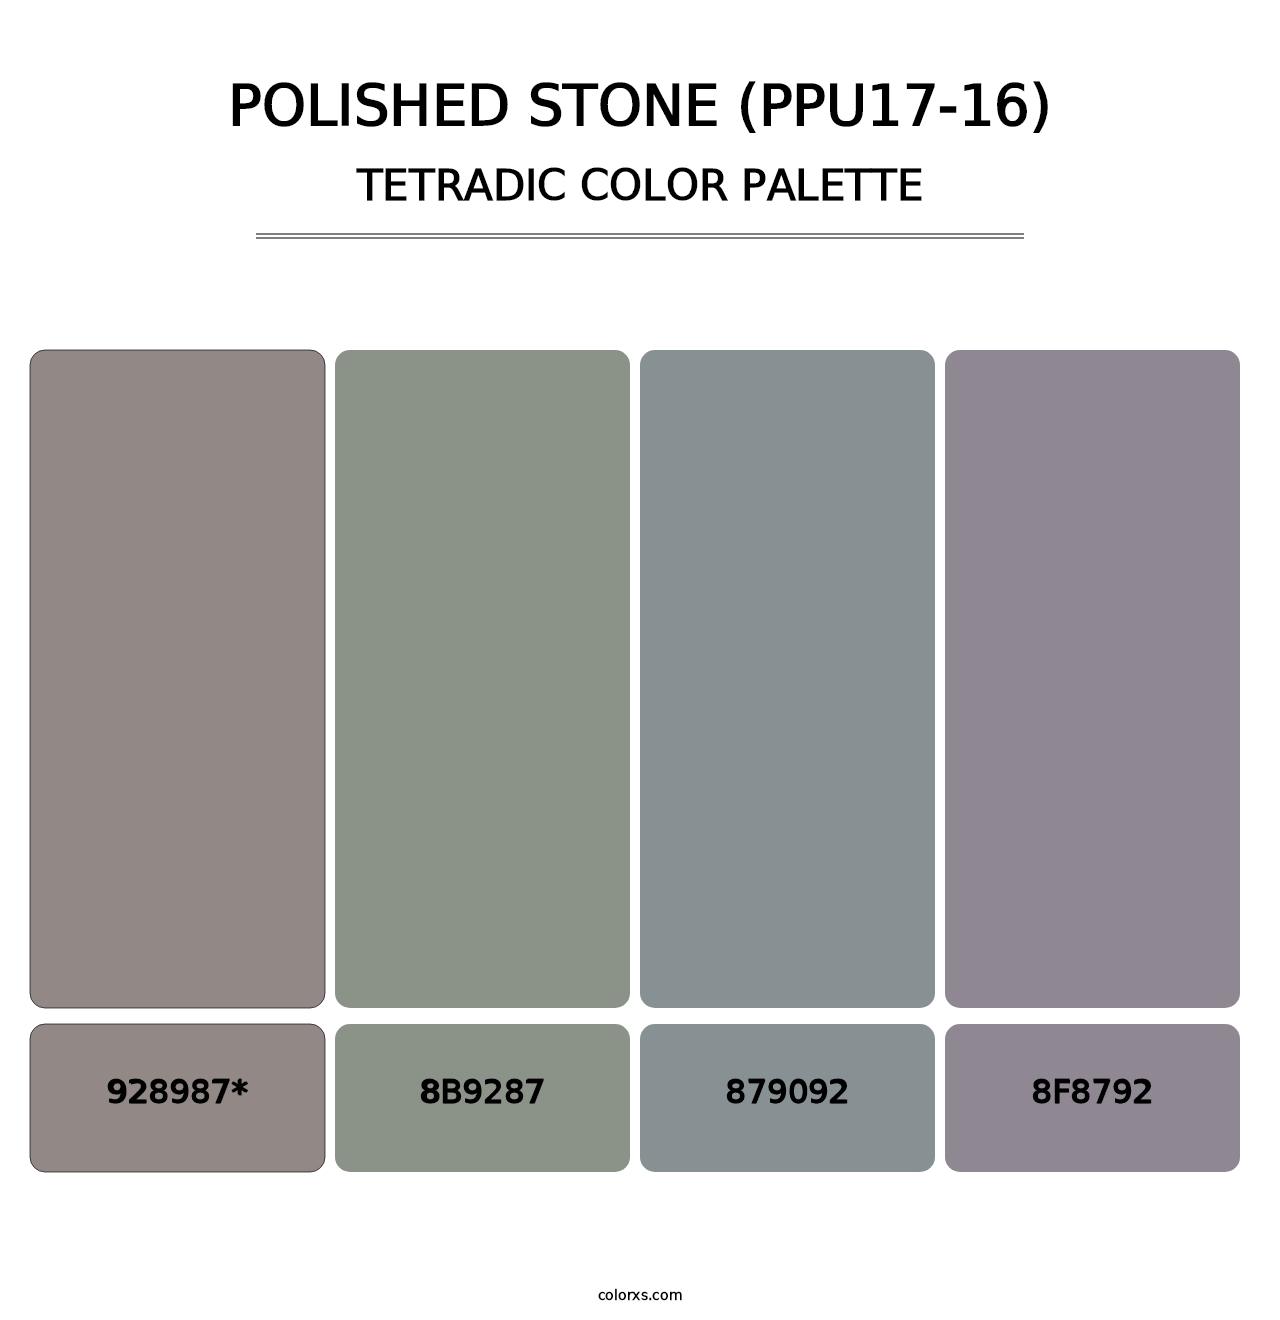 Polished Stone (PPU17-16) - Tetradic Color Palette